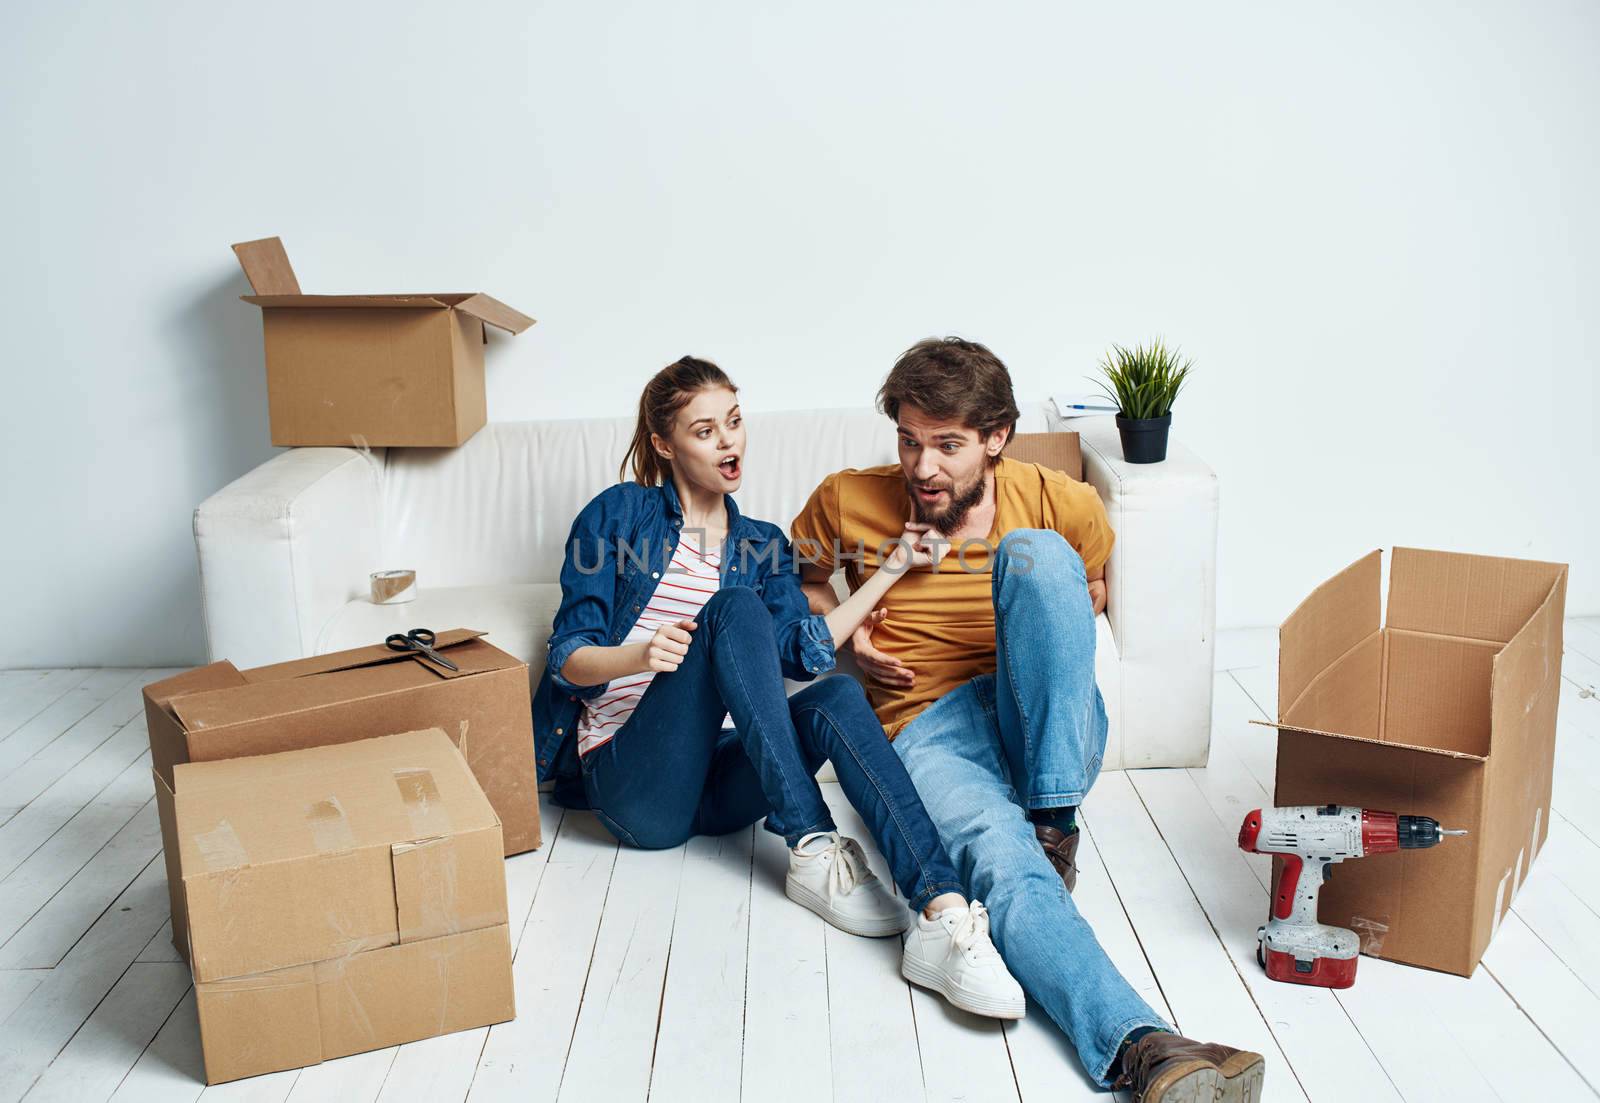 Emotional man and woman with cardboard boxes on the floor having fun moving renovation work by SHOTPRIME